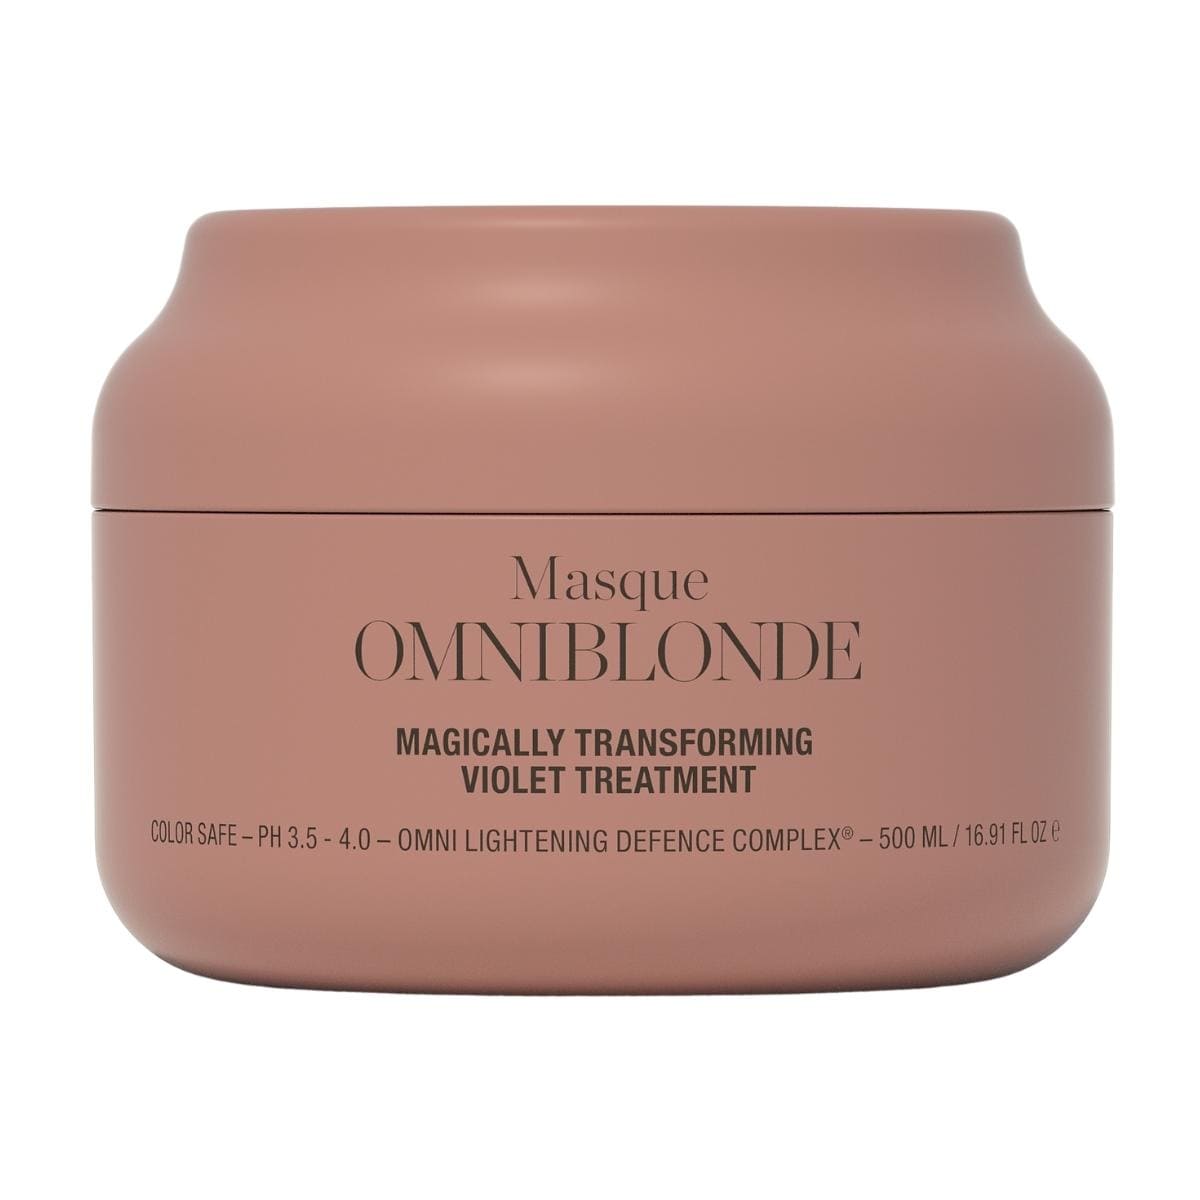 Omniblonde Magically Transforming Violet Treatment 500ml.